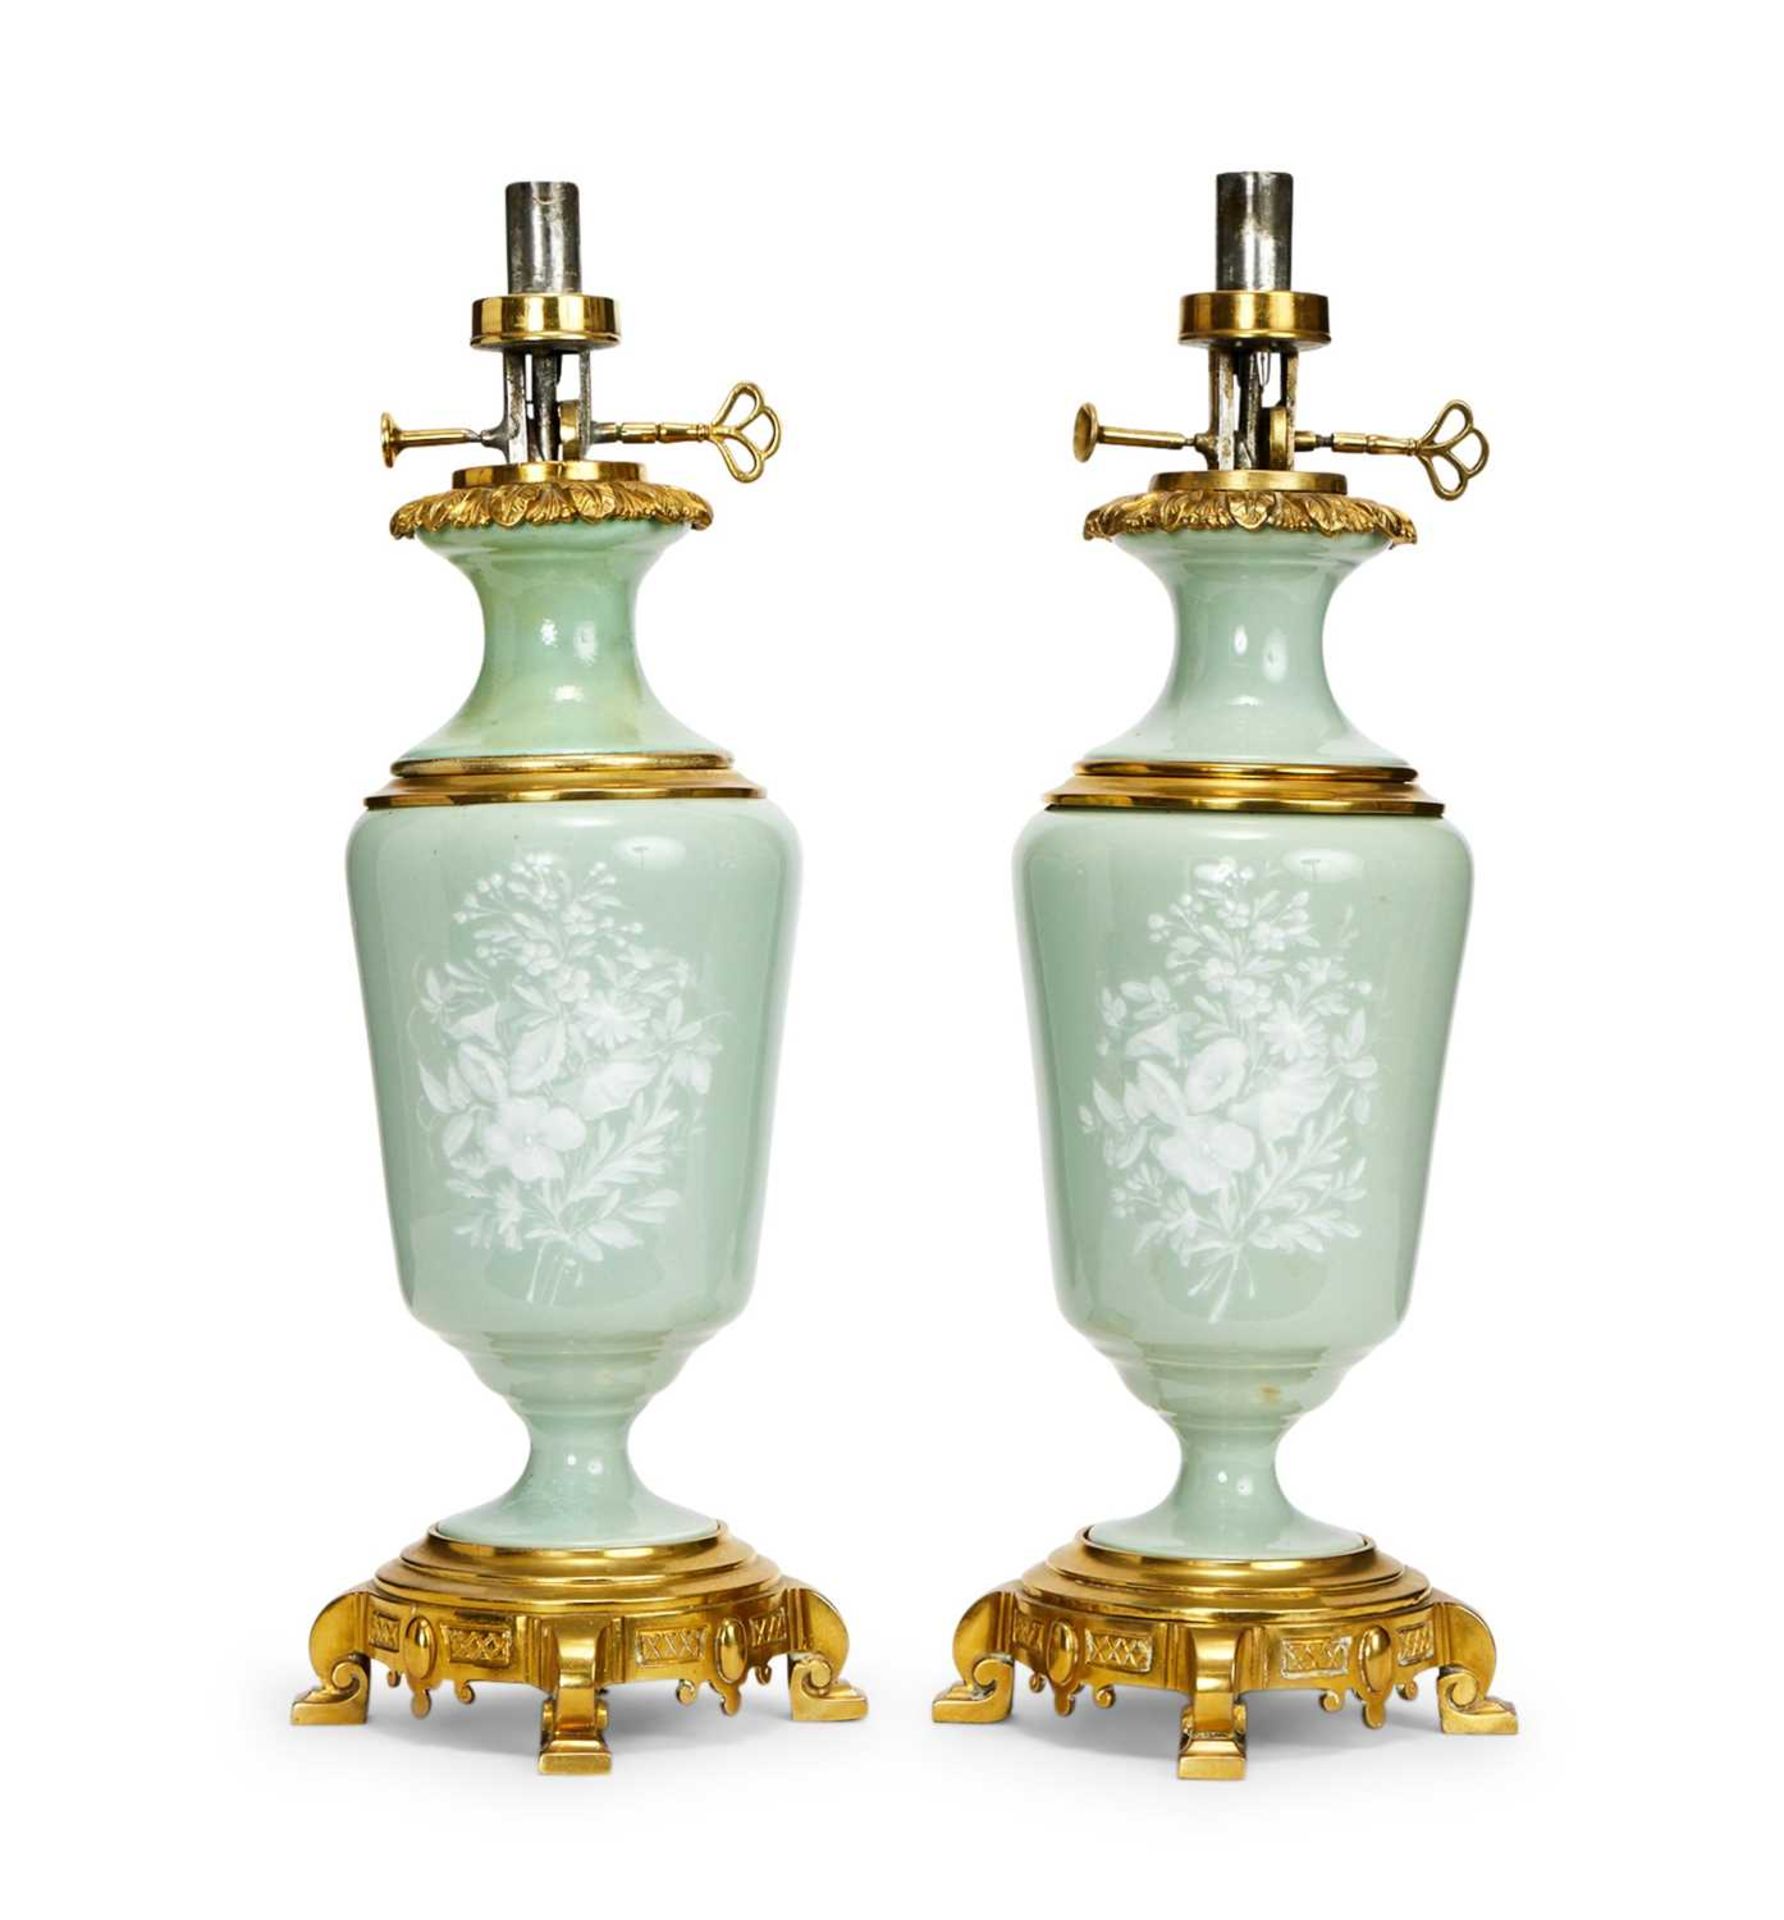 A PAIR OF LATE 19TH CENTURY CELADON PATE SUR PATE PORCELAIN AND ORMOLU MOUNTED LAMP BASES - Image 2 of 2